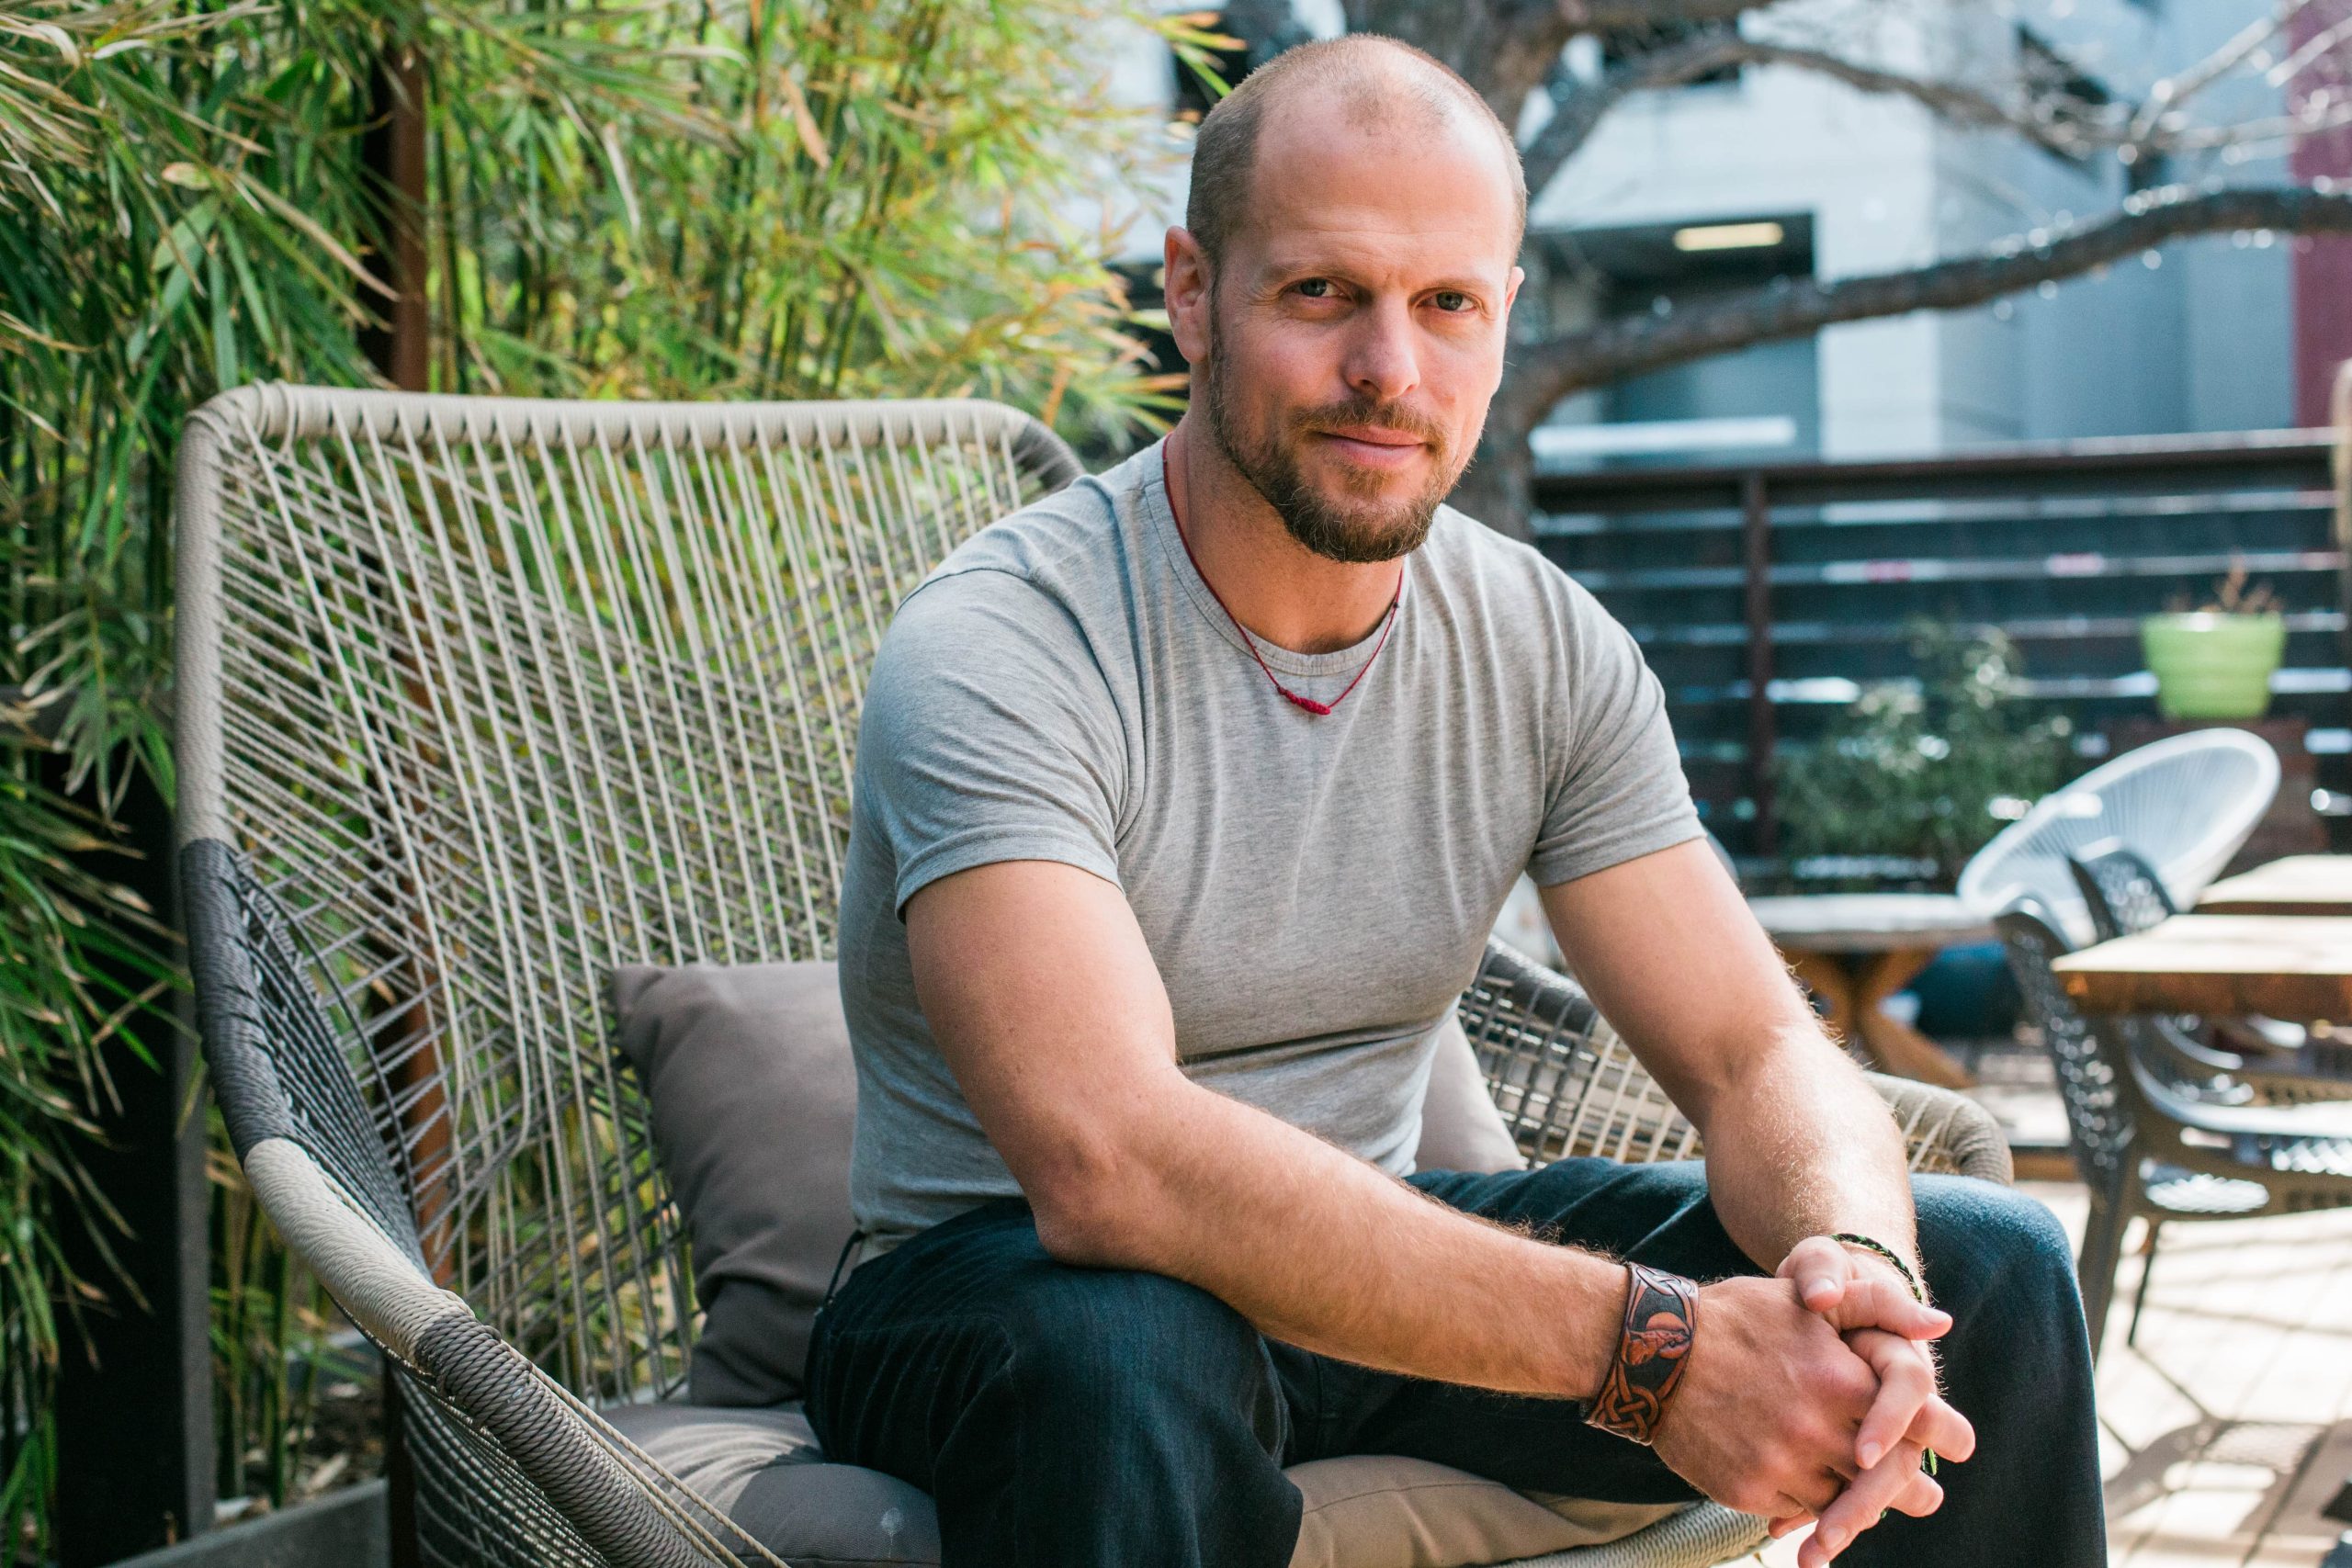 Tim Ferriss: 2 methods to learn new skills fast and become ultra-productive